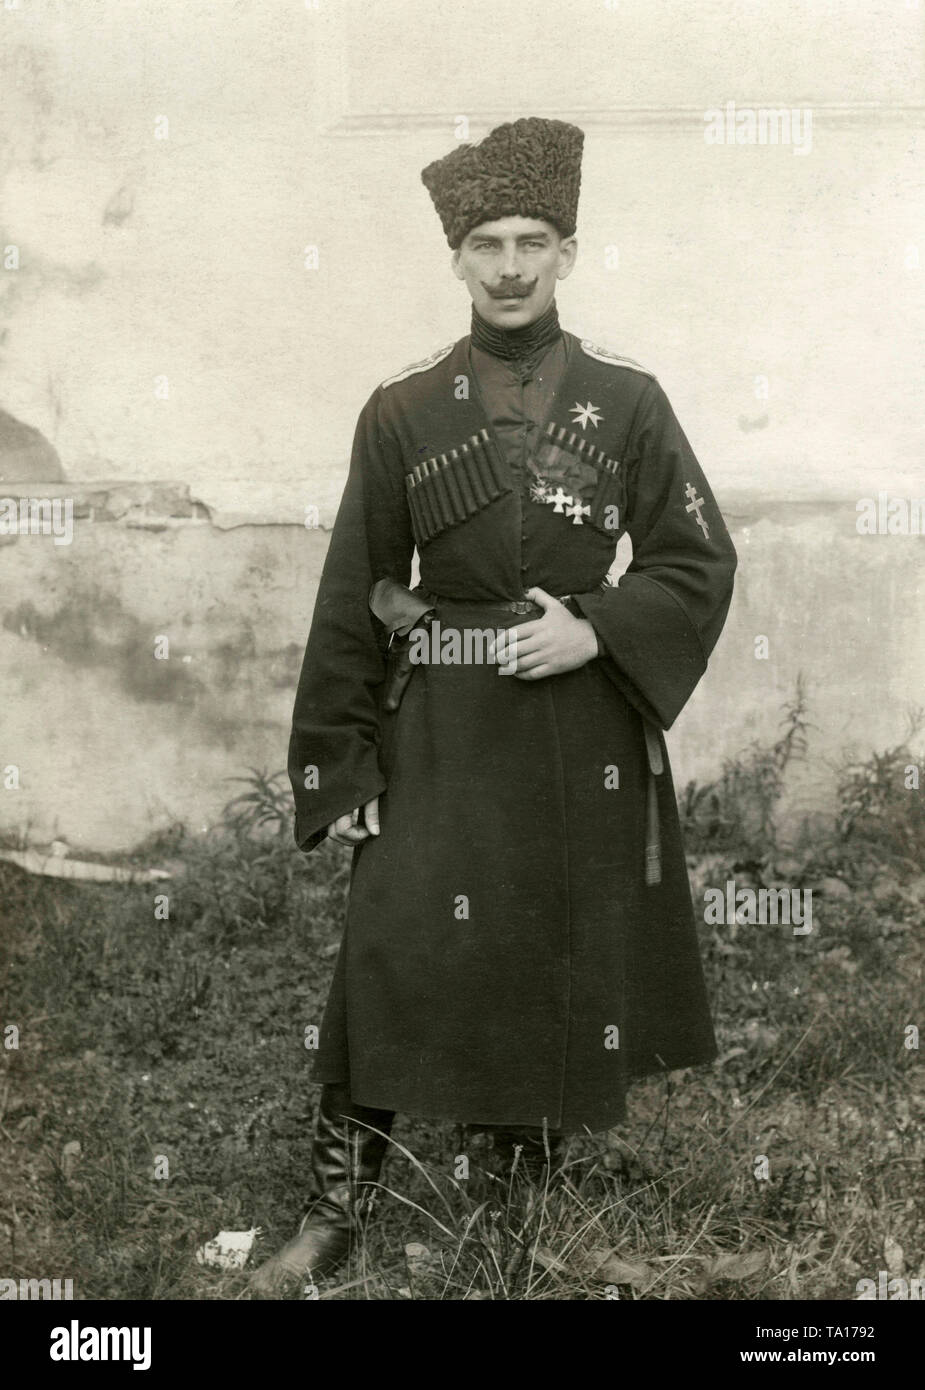 Portrait of the leader of the West Russian Liberation Army, Prince Pavel Mikhailovich Bermondt-Awaloff. On his chest are several medals, including the Russian Order of Saint George and the Order of St. Vladimir, and the Orthodox cross on the left sleeve. Stock Photo